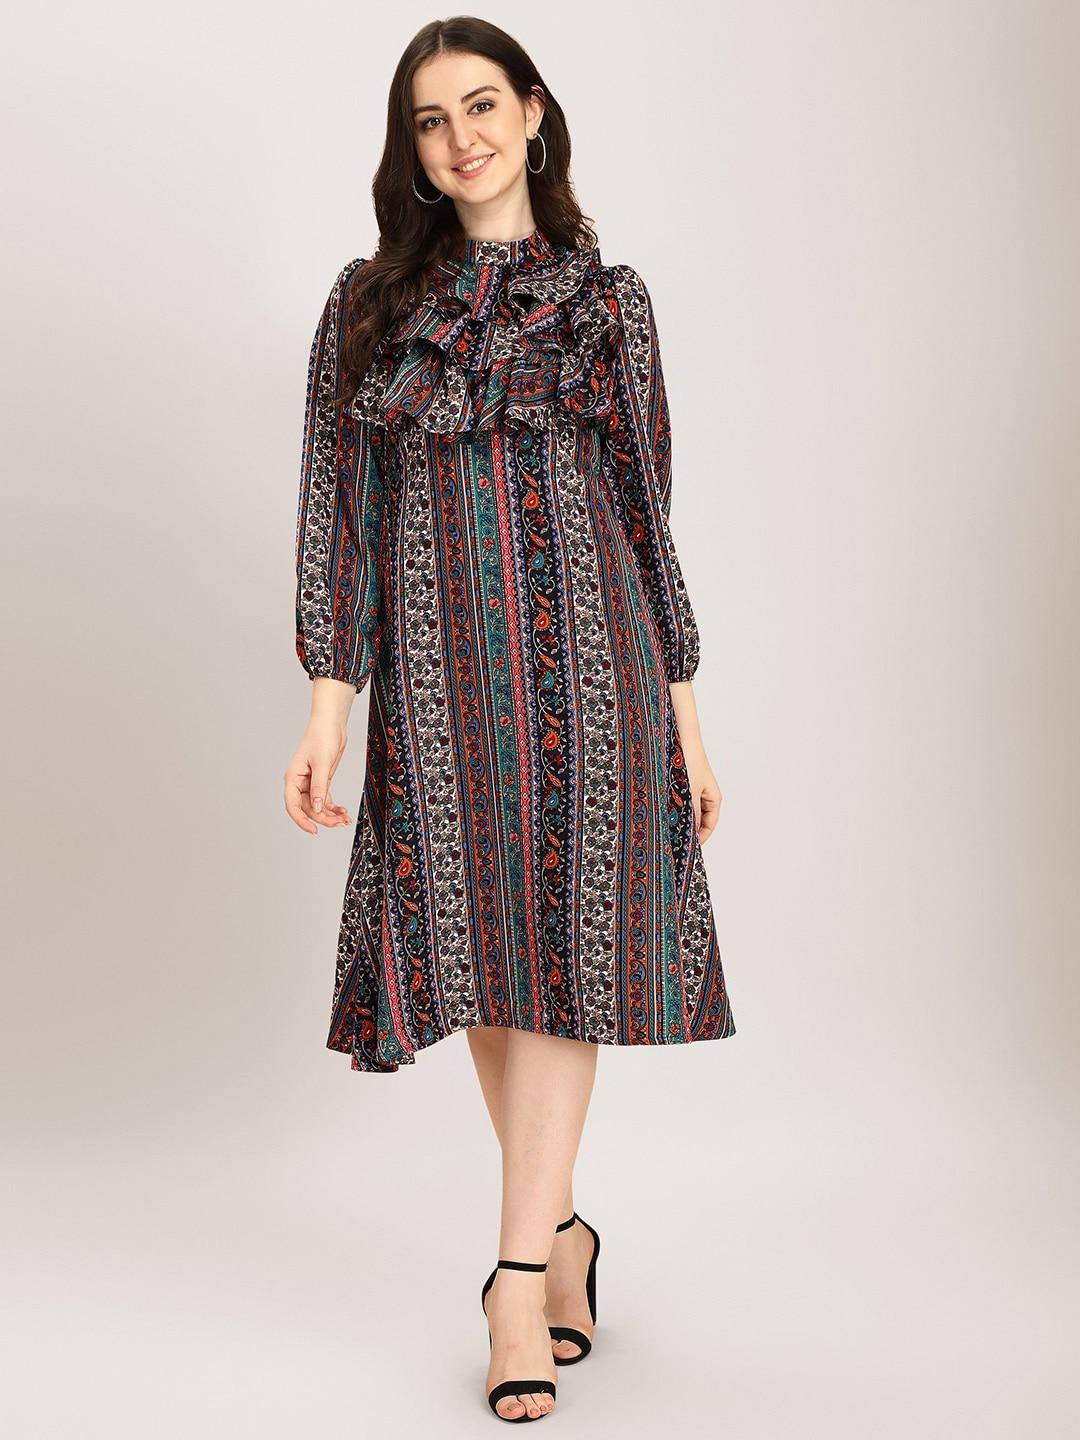 BAESD Floral Printed High Neck Puff Sleeves Ruffles Detail A-Line Dress